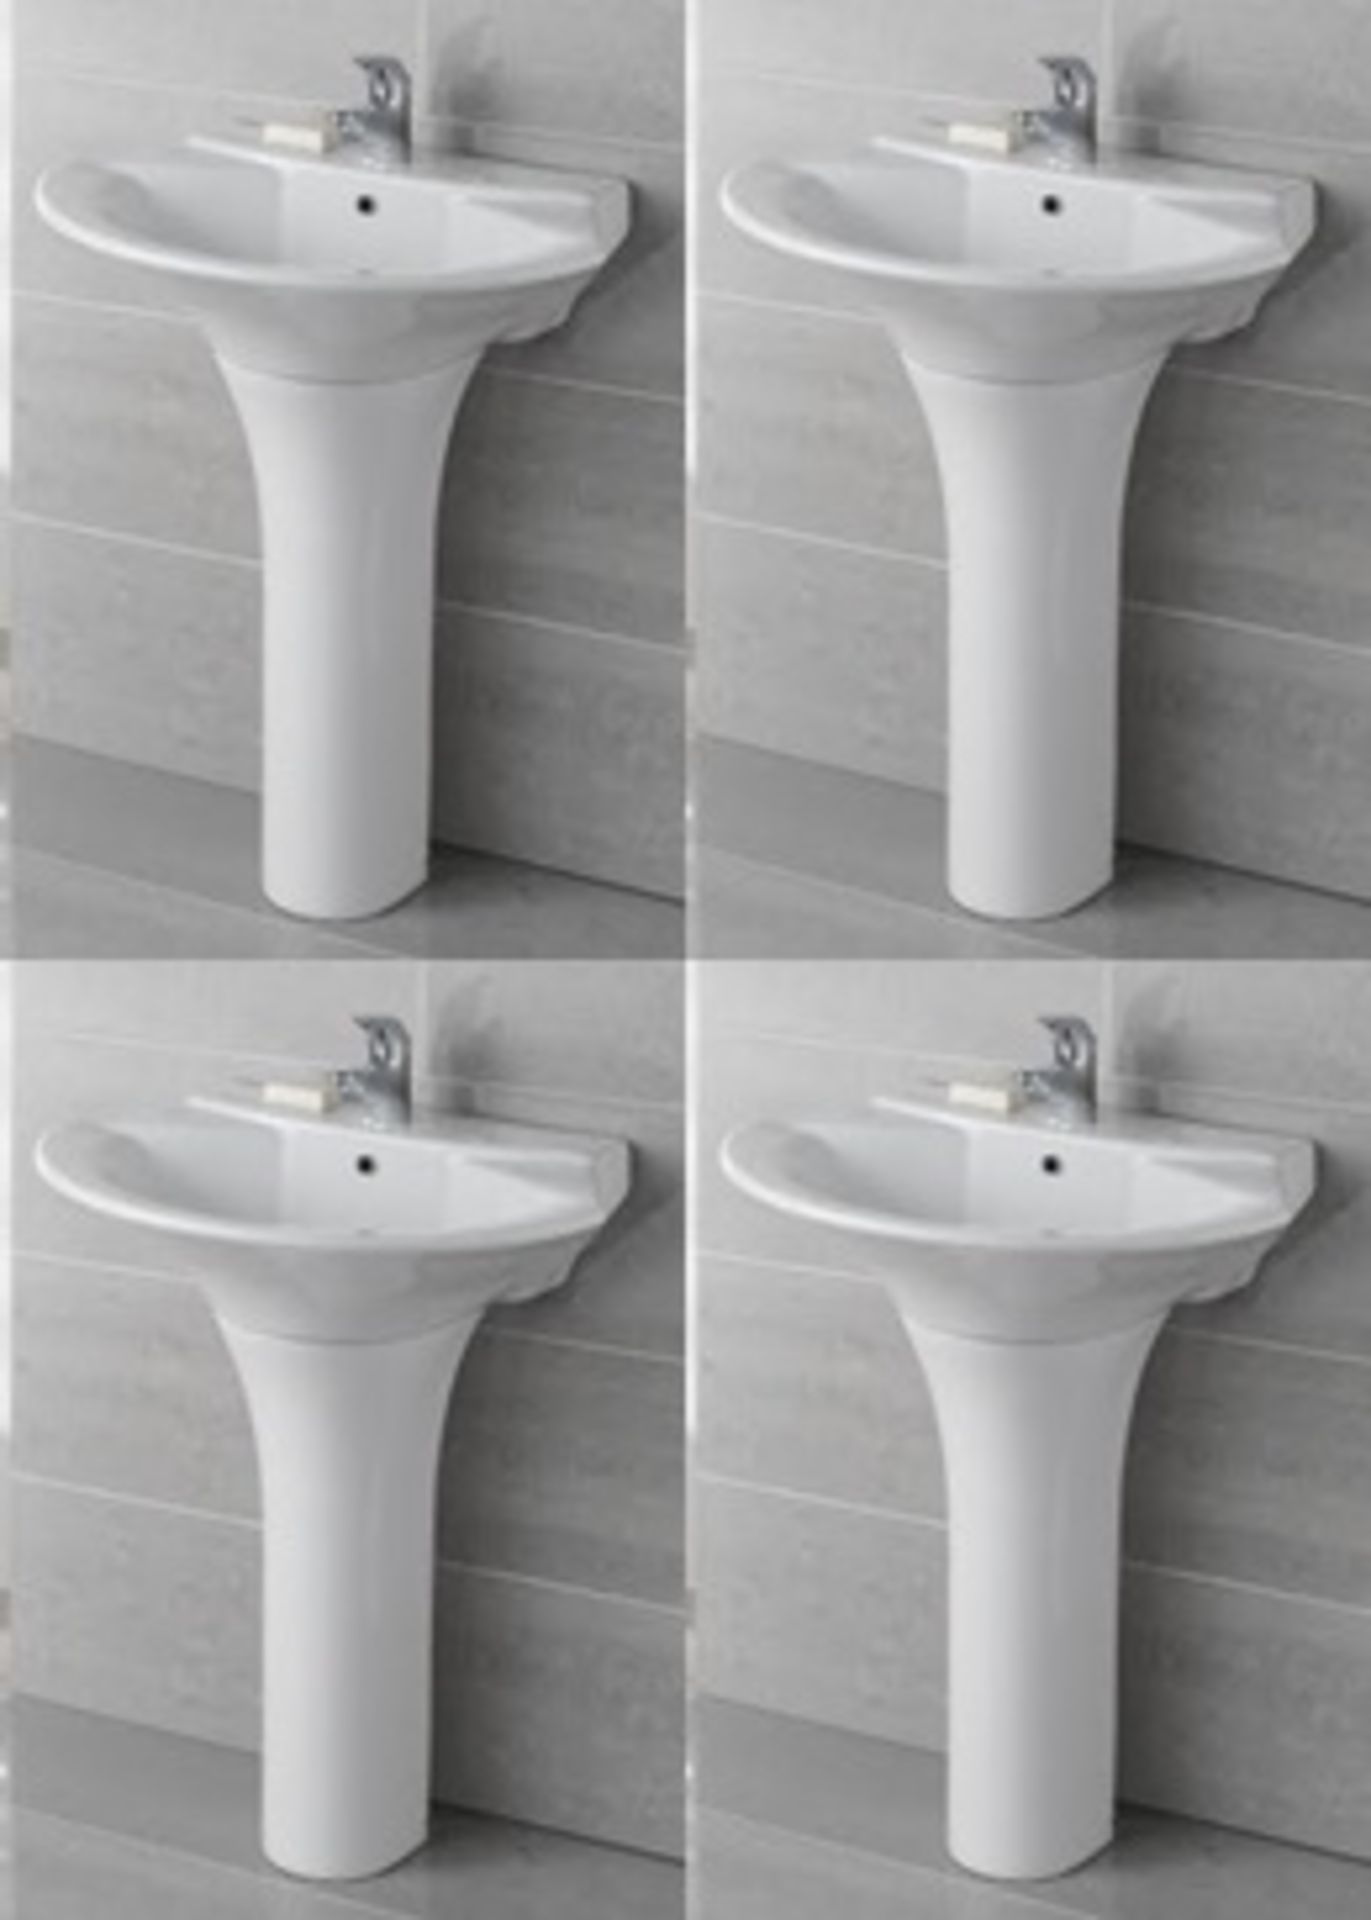 4 x Vogue Bathrooms CLARA Single Tap Hole SINK BASINS With Pedestals - 710mm Width - Product Code - Image 2 of 2